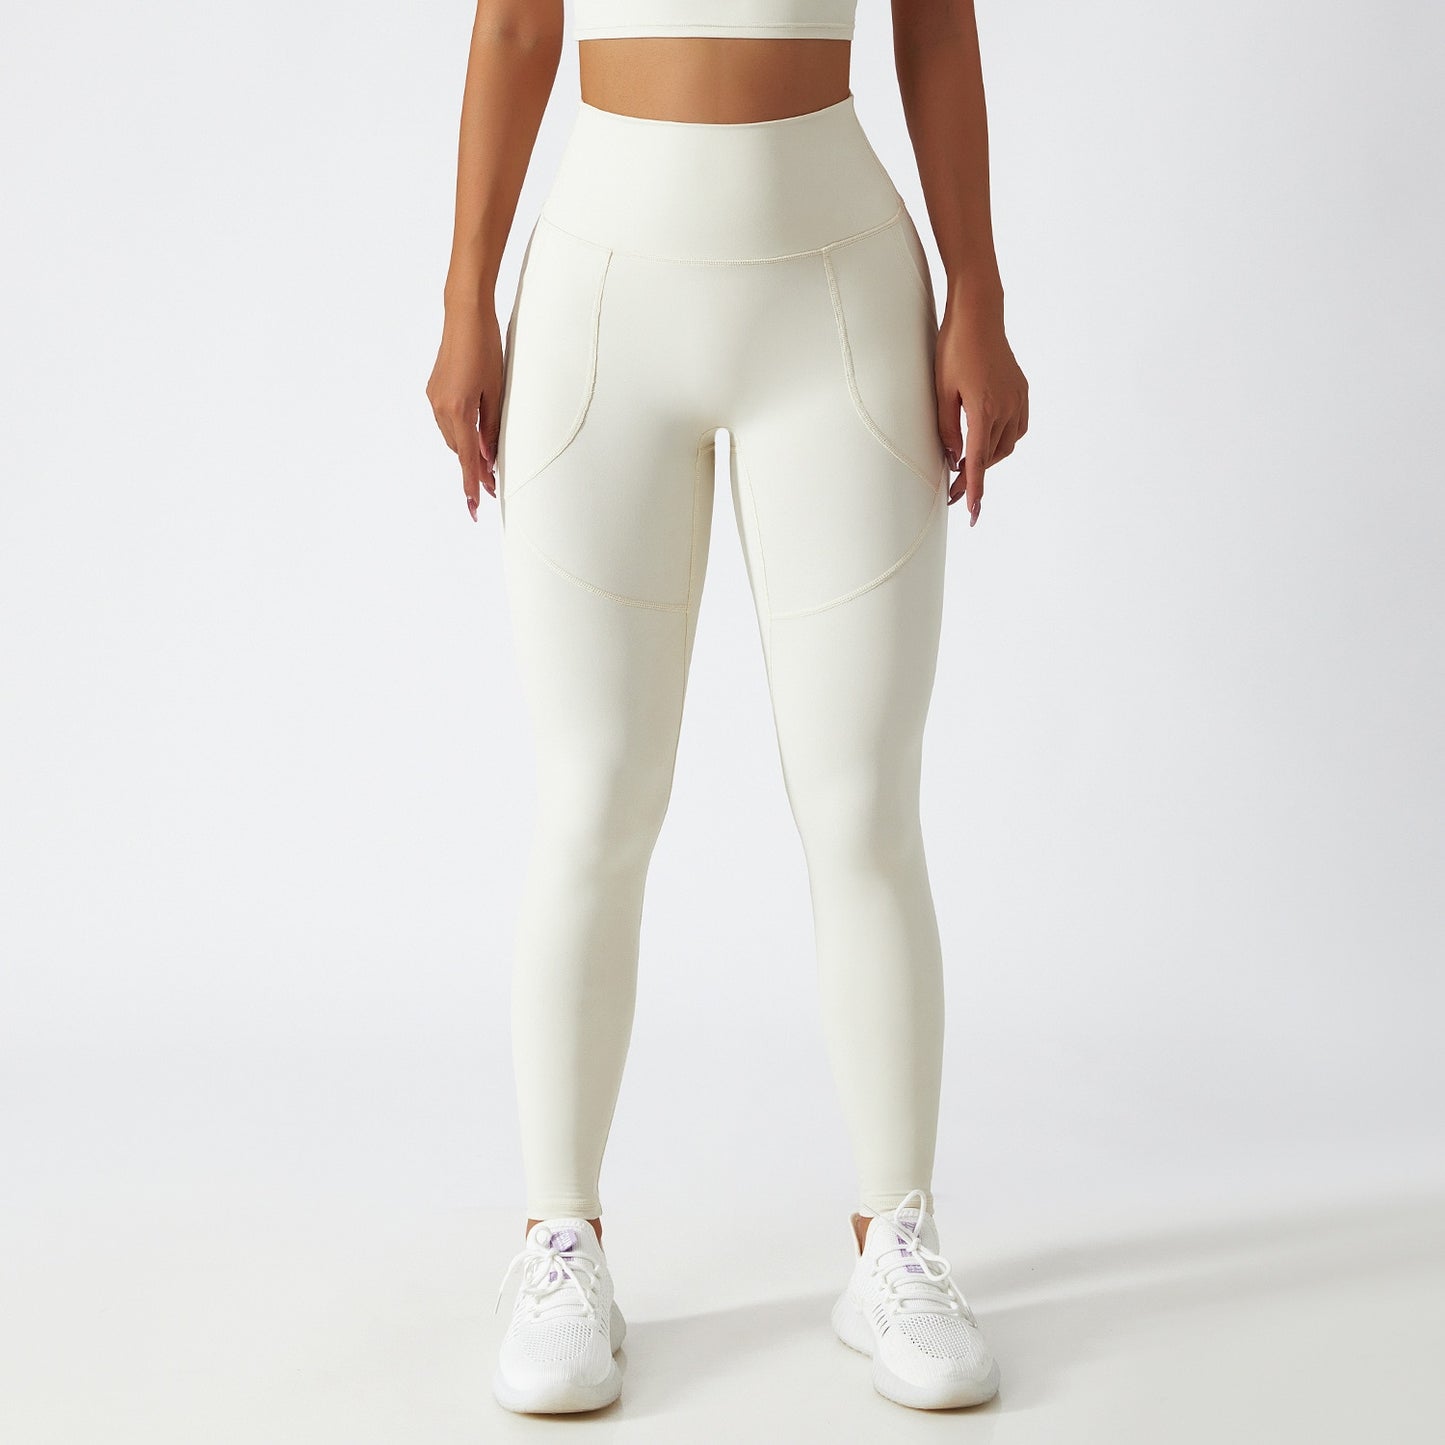 Seamless Leggings With Side Pockets